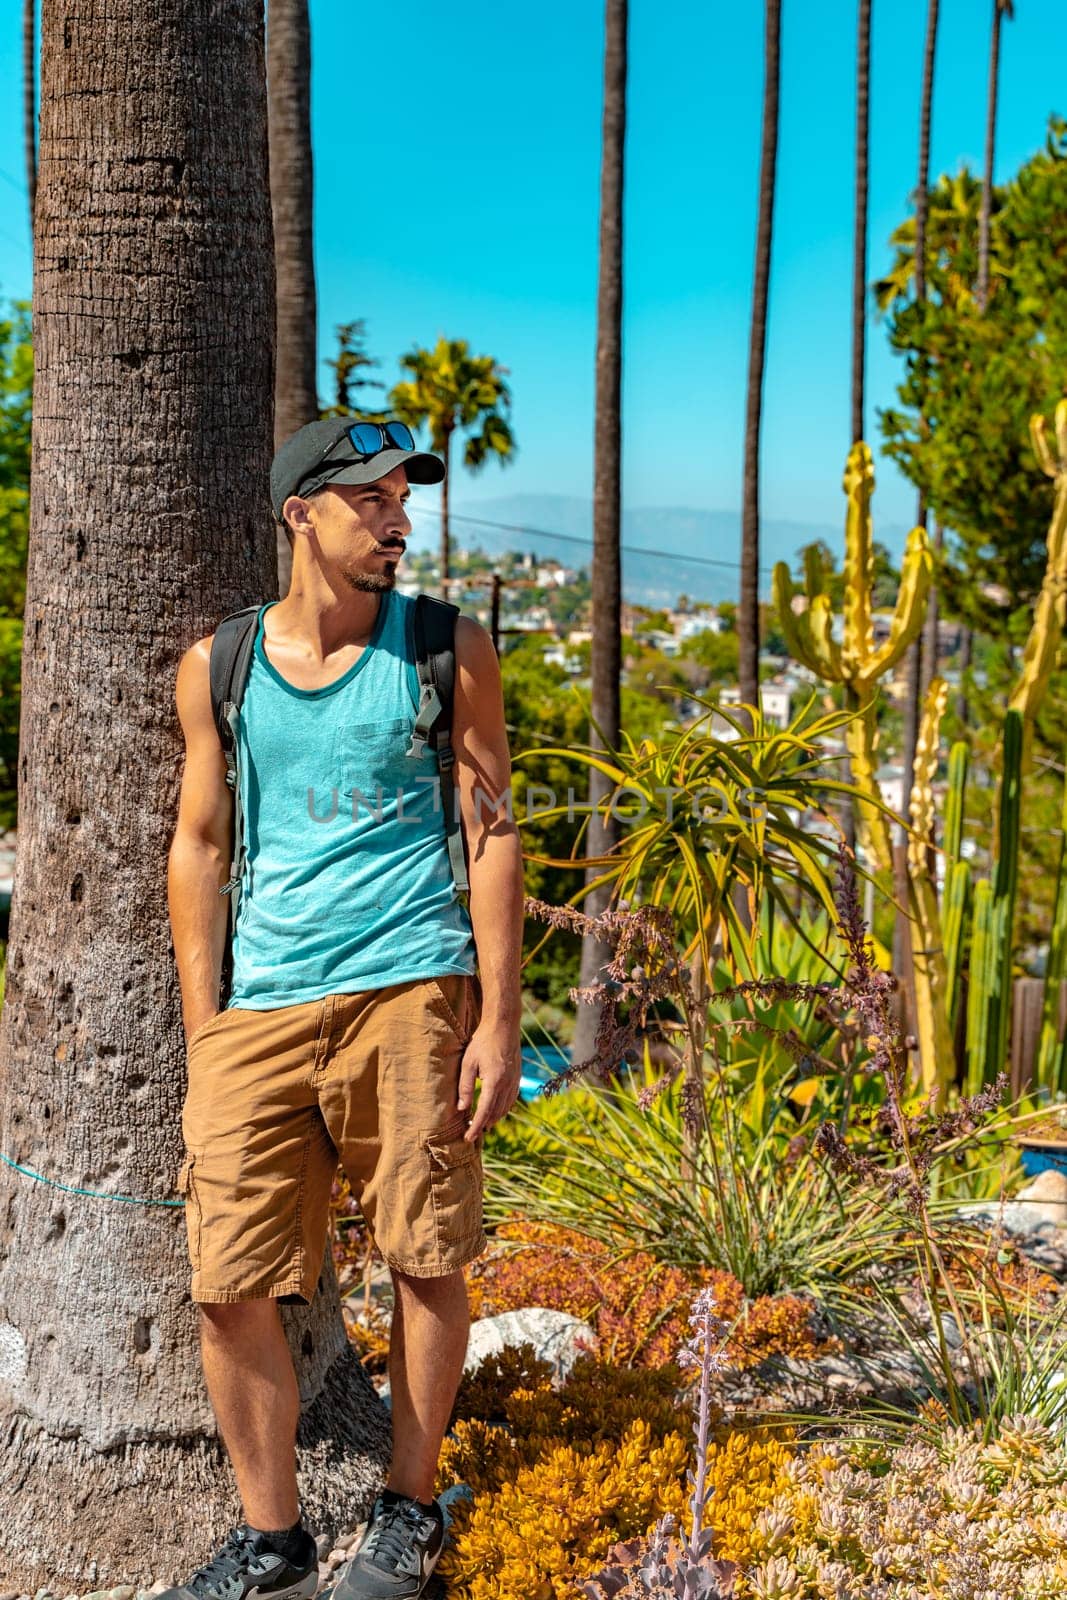 Portrait of stylish student in California with palm trees in the background during a sunny colorful day. by PaulCarr